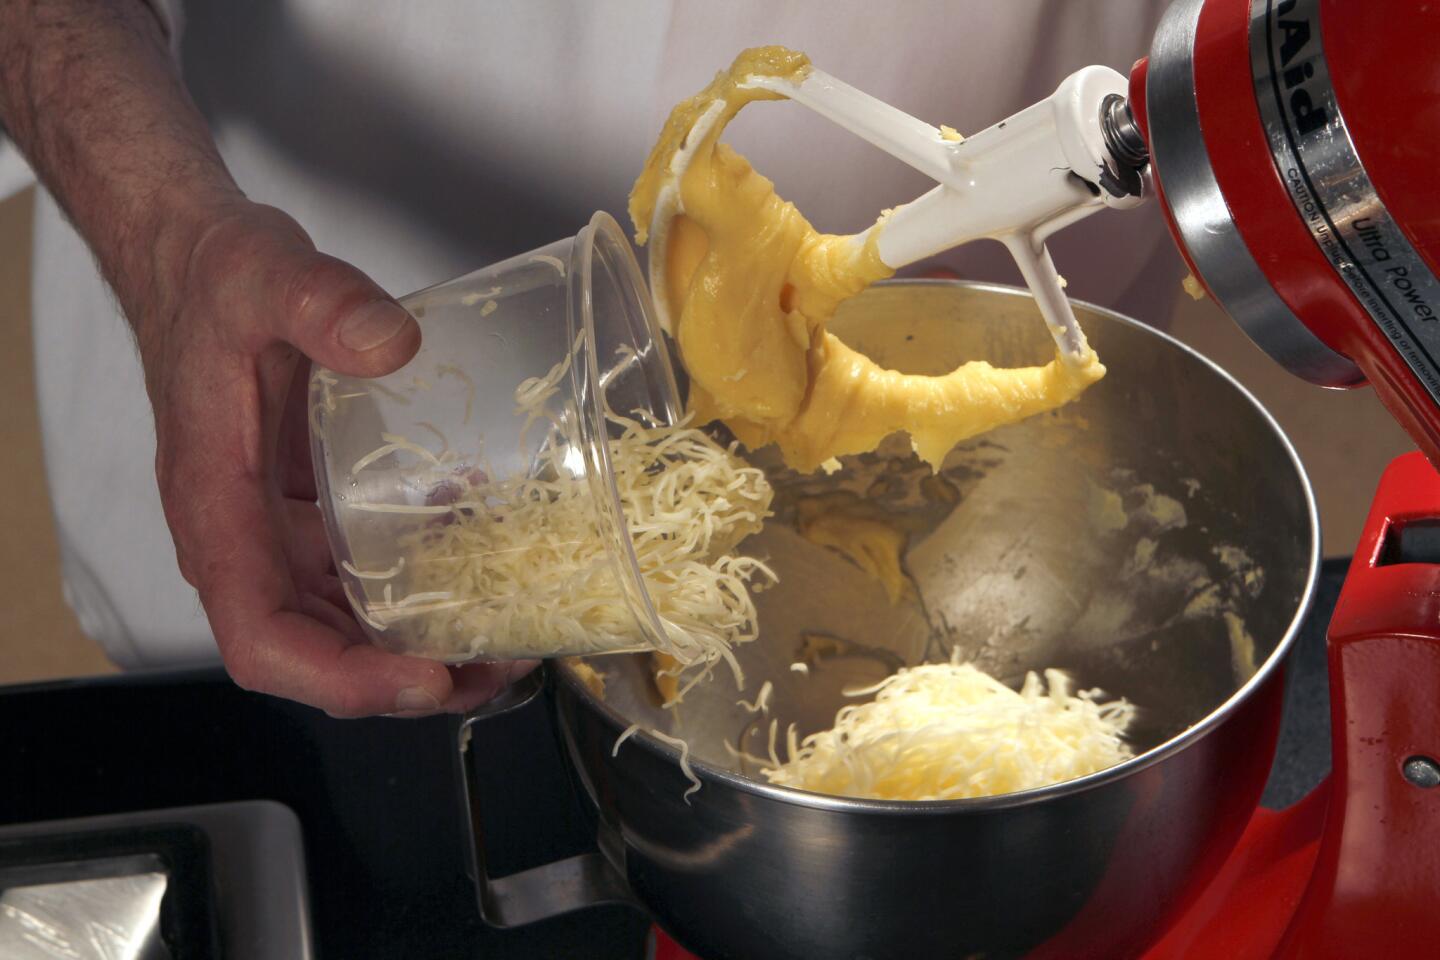 Beat the grated cheese into the mixture.